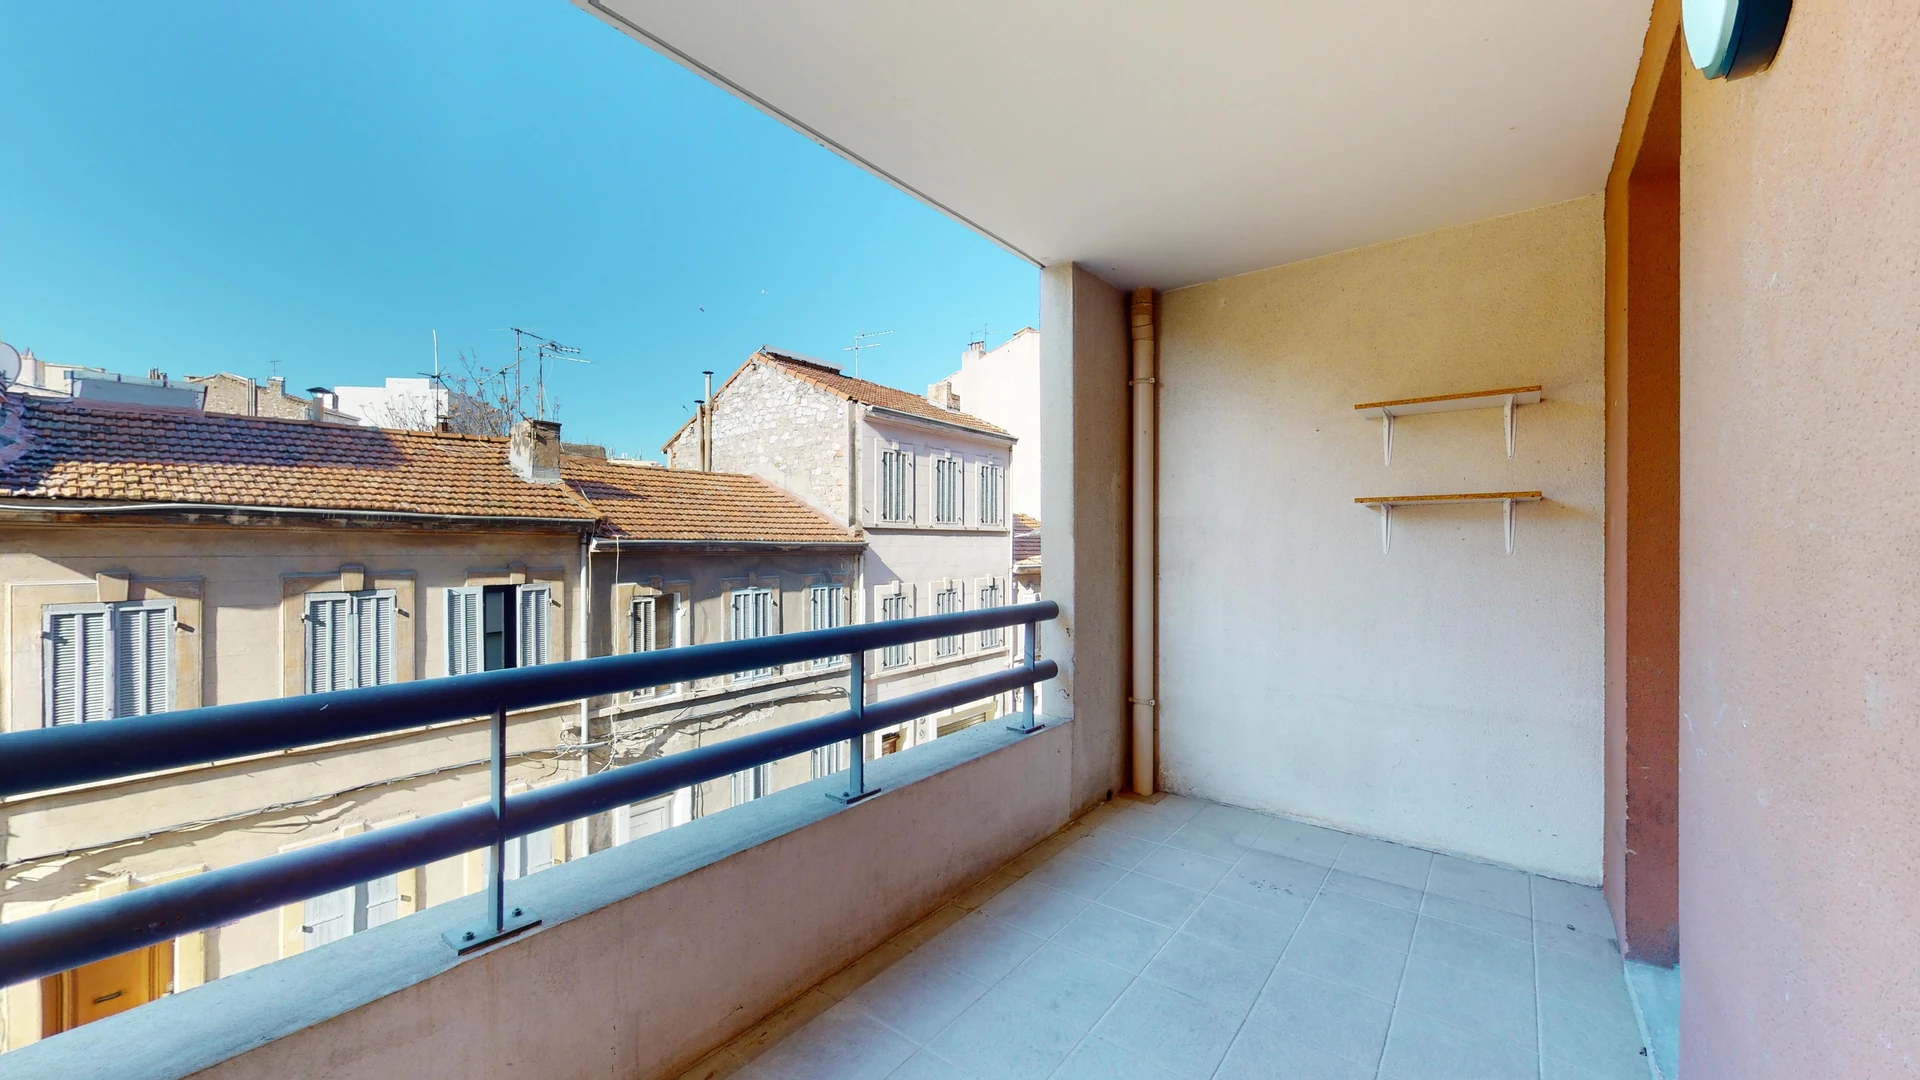 Room for rent in a shared flat in Marseille